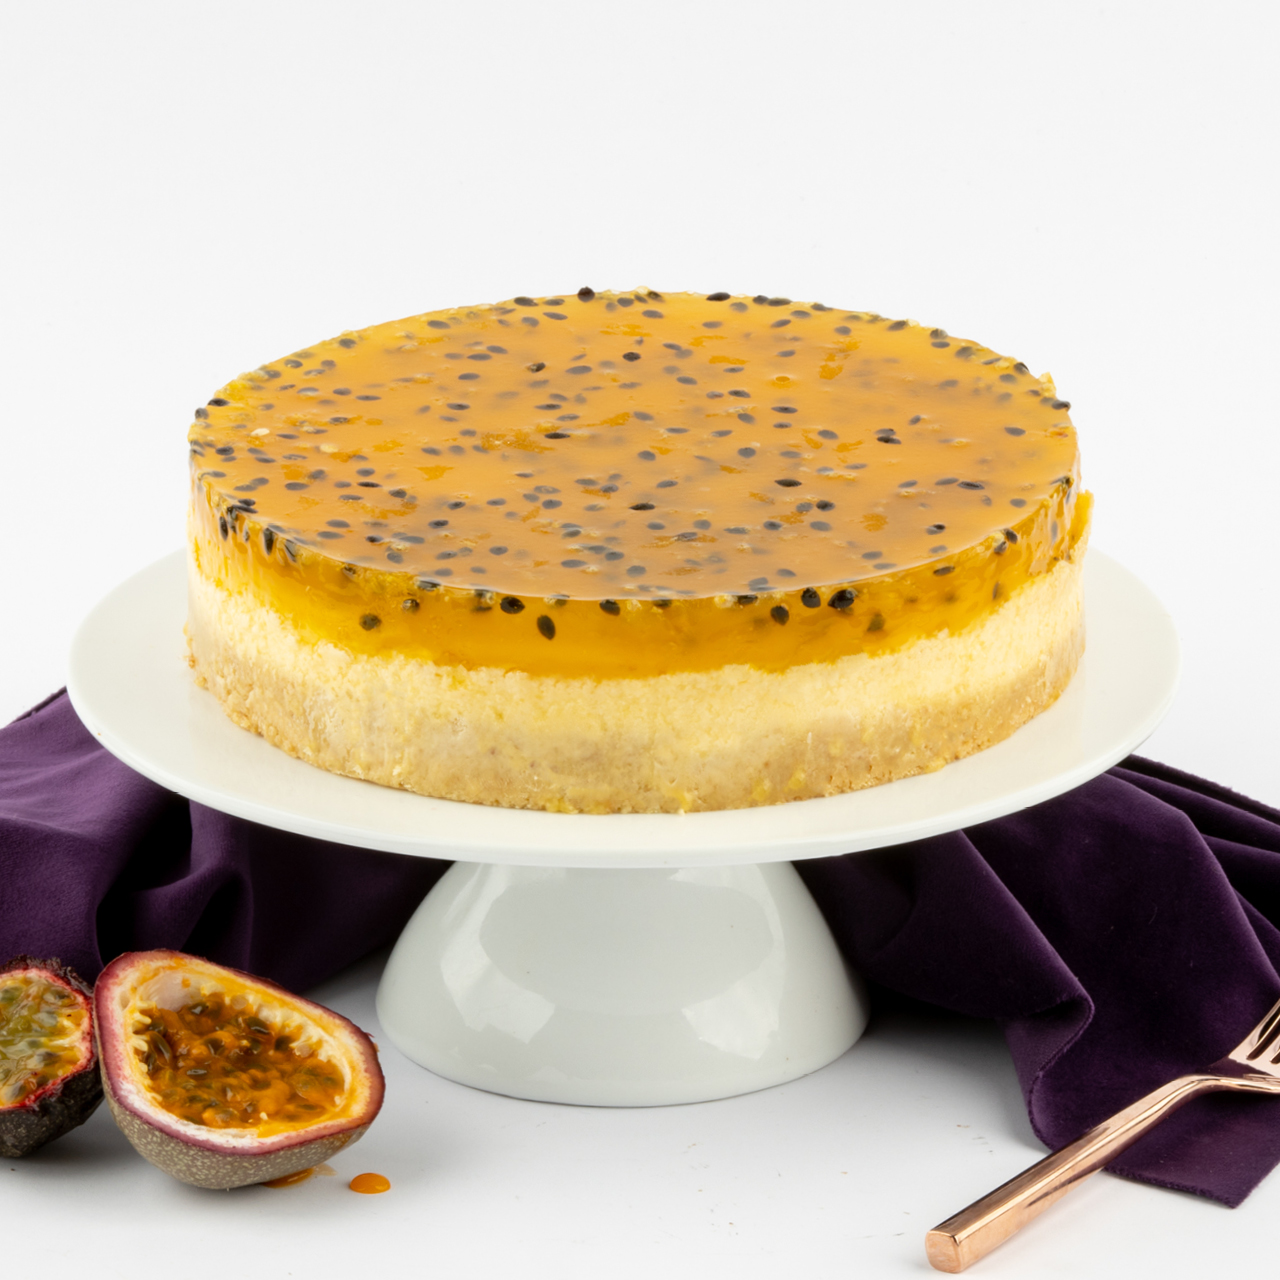 Passionfruit Baked Cheesecake – Michel's